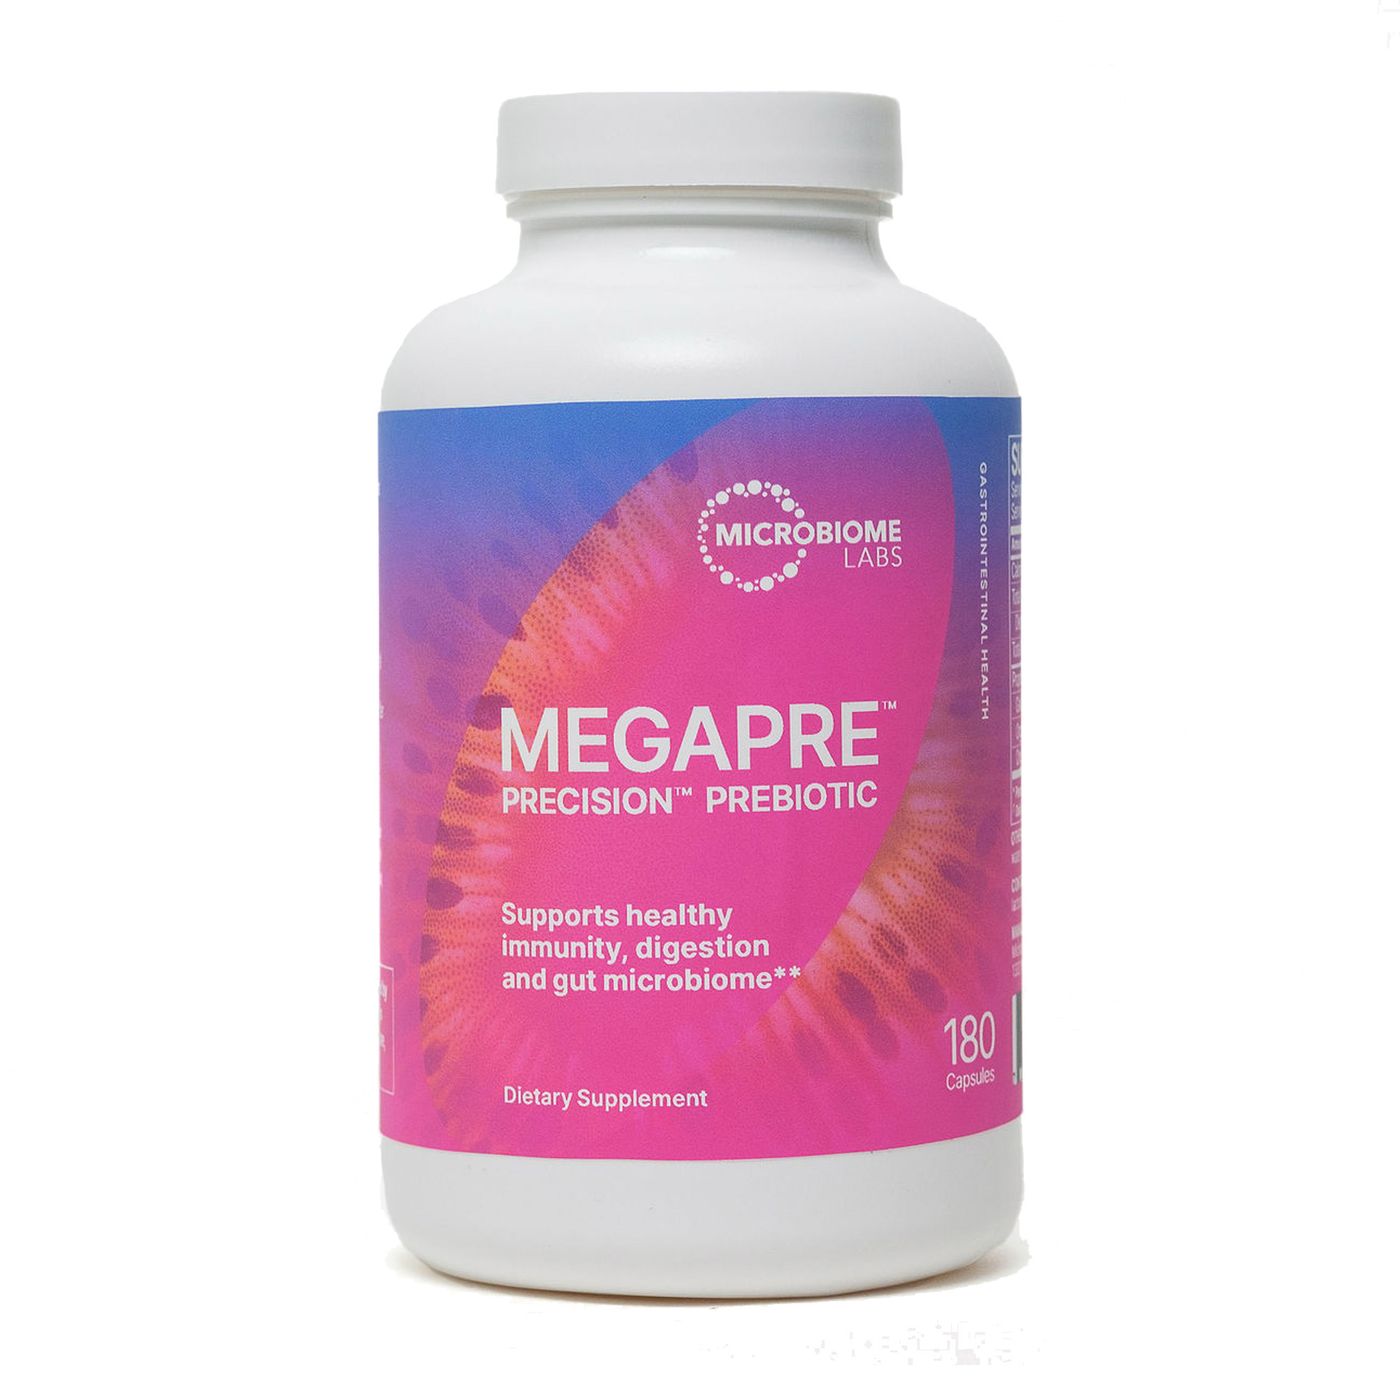 MegaPre Capsules 180 ct Curated Wellness